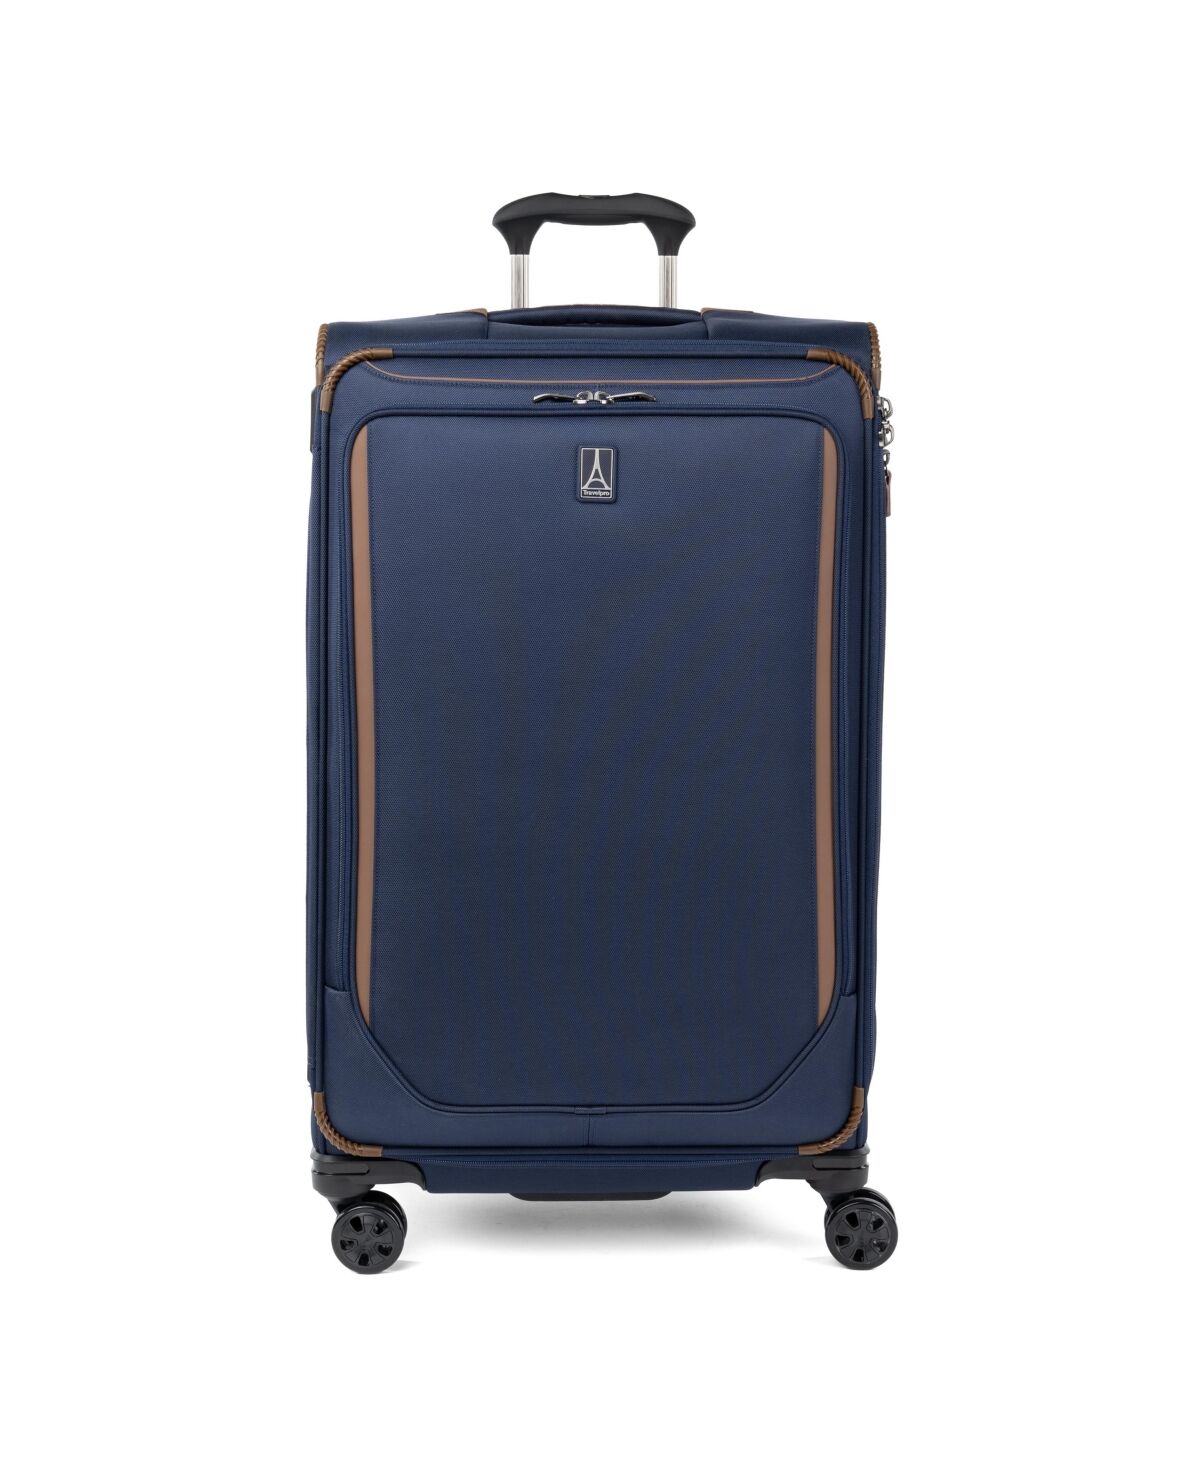 Travelpro New! Travelpro Crew Classic Large Check-in Expandable Spinner Luggage - Patriot Blue